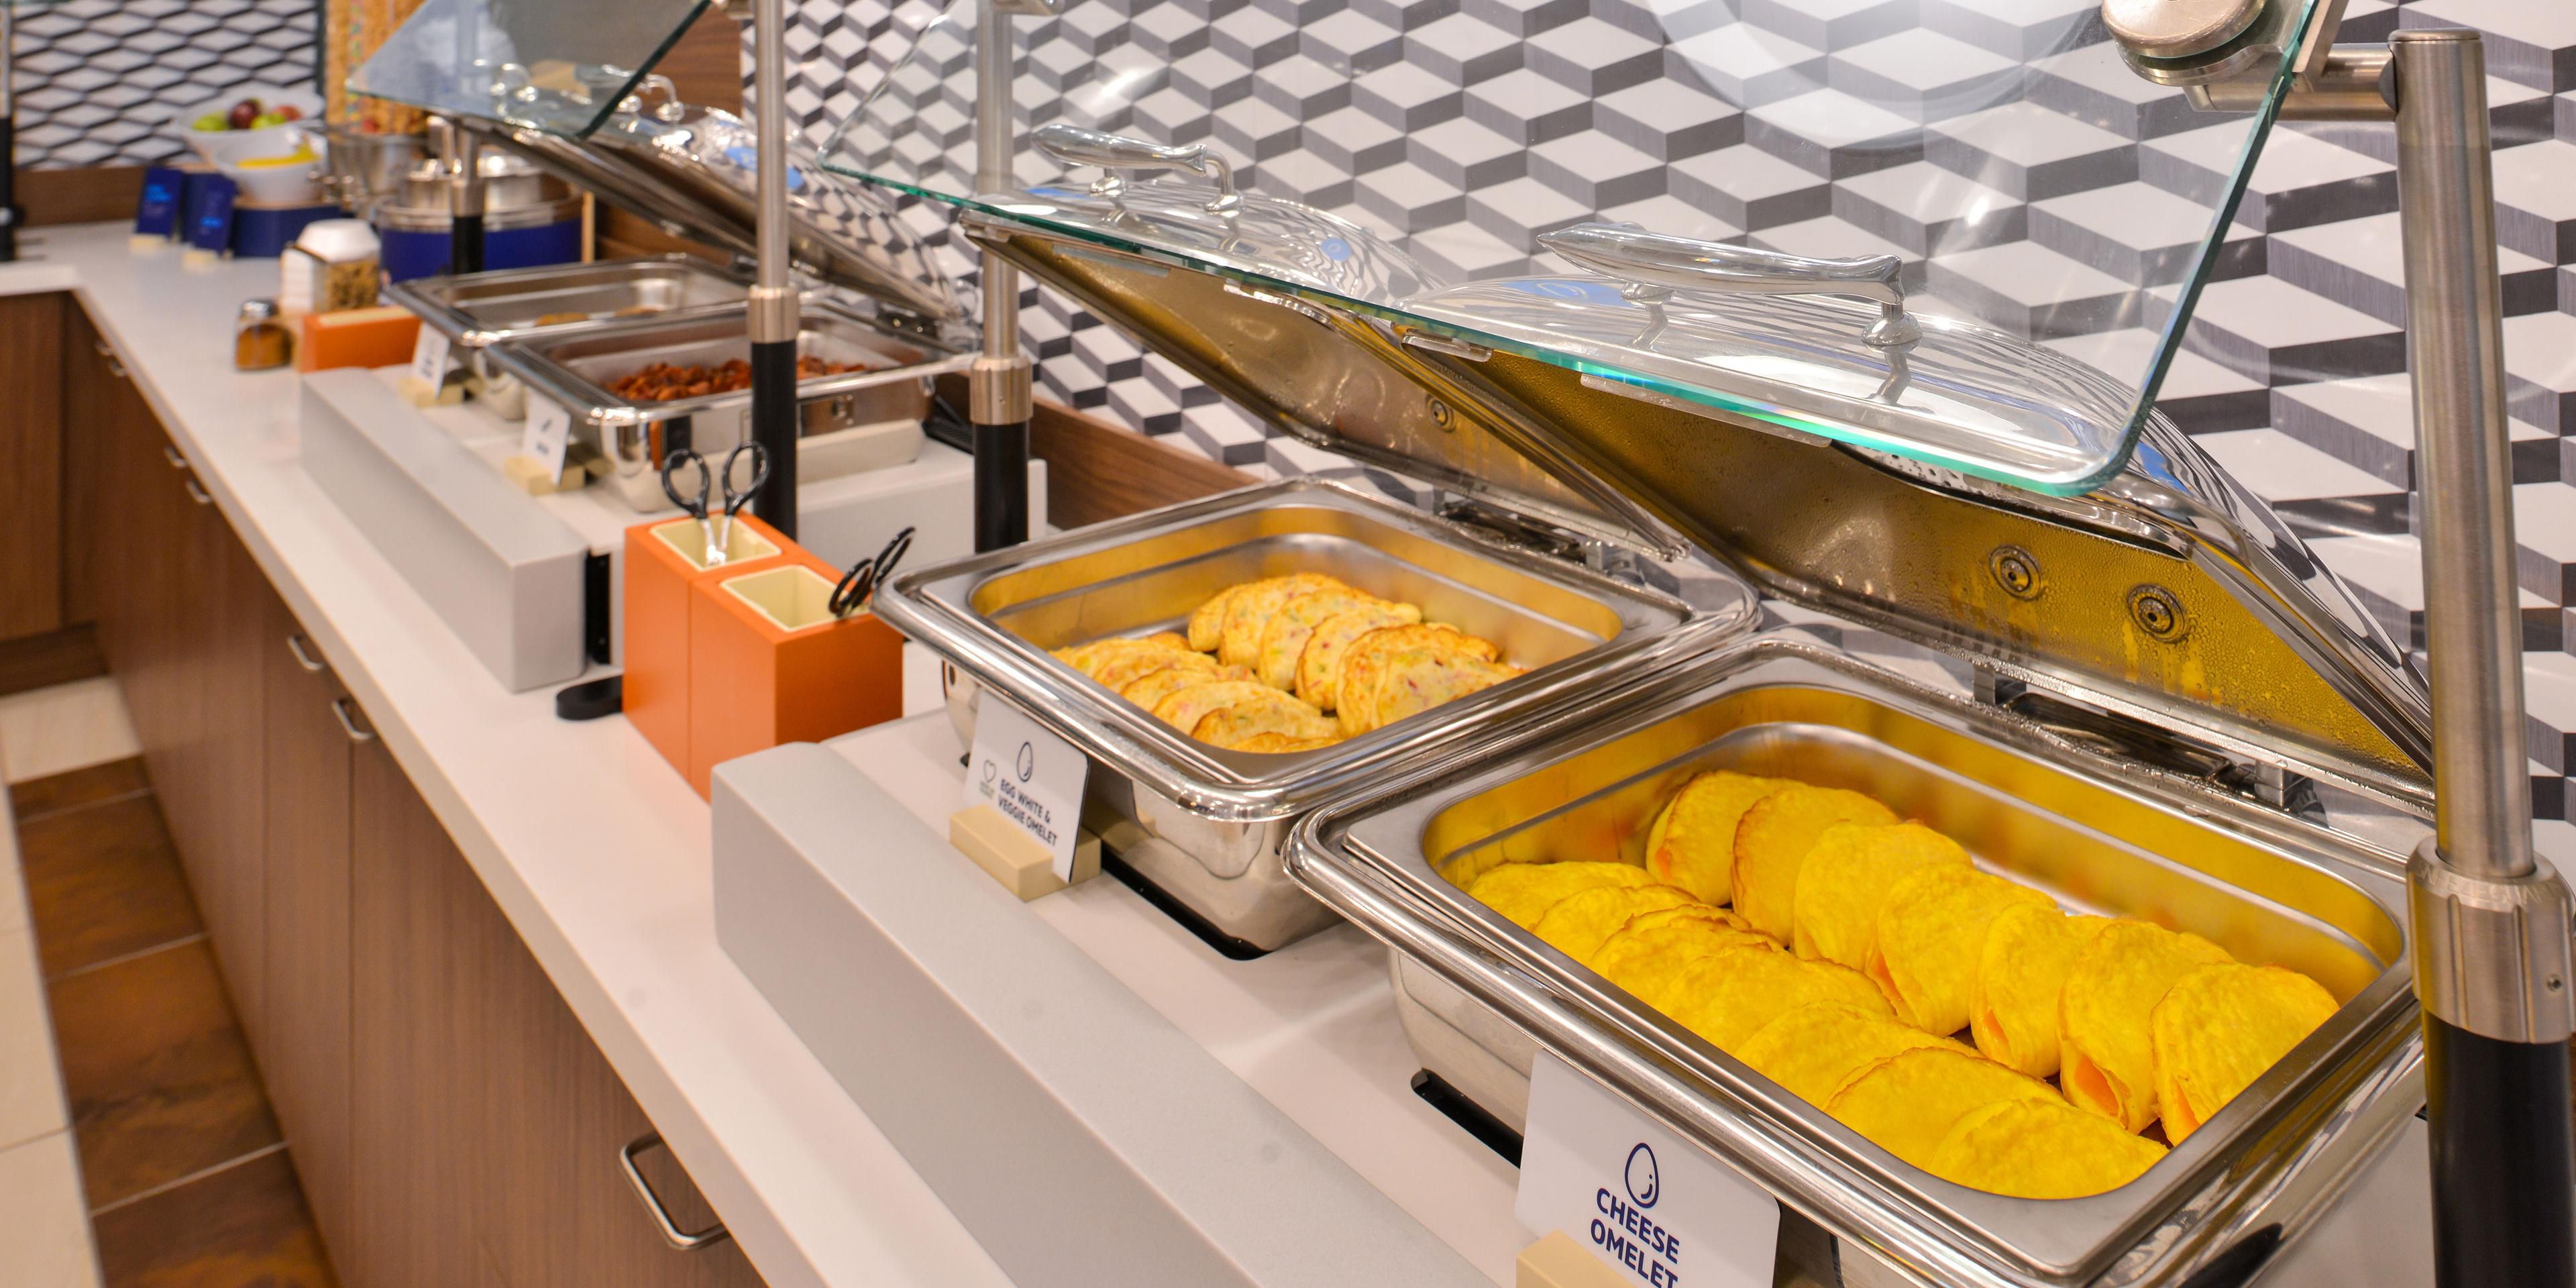 We are serving a full cafeteria-style breakfast that includes Scrambled Eggs, Omelets, Turkey Sausage, Pork Links, Veggie Omelets, Fresh Fruit, Sausage Biscuits, and Gravy, Oatmeal, and many more options available as well as a gluten-free option.